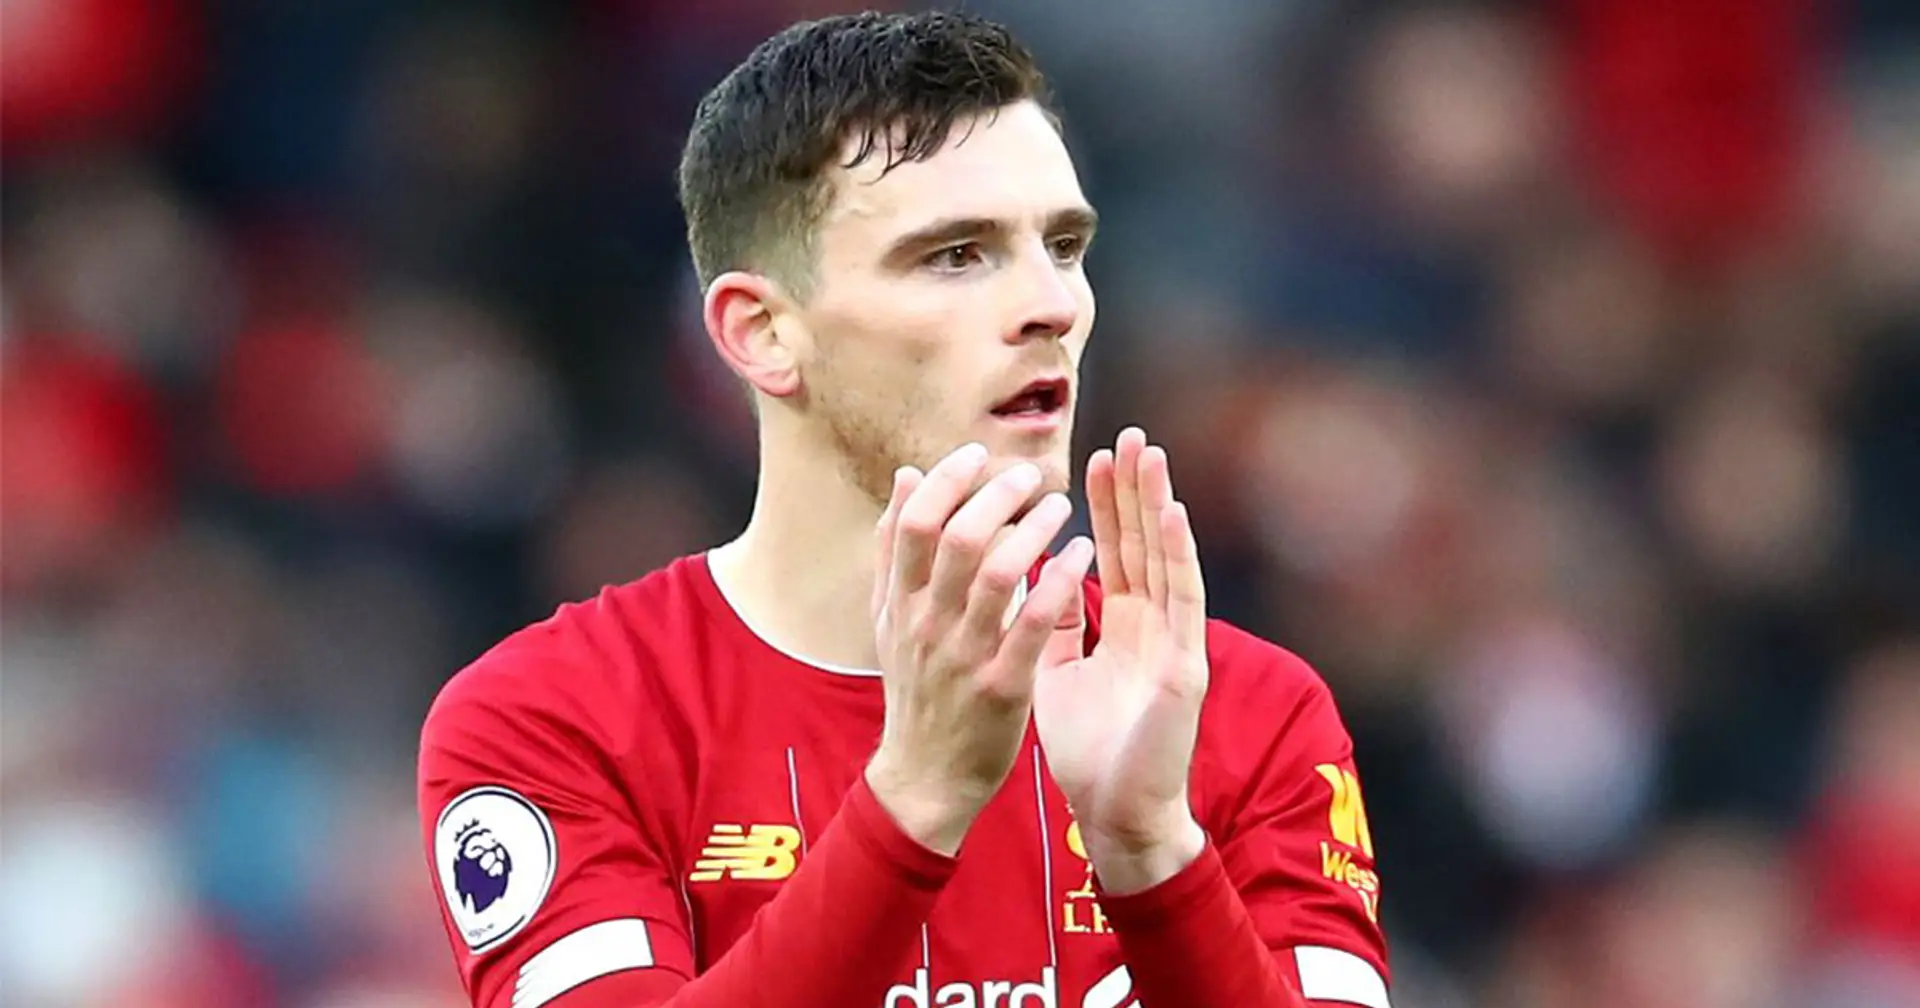 'She always believed I was something special': Andy Robertson recalls being released by Celtic and losing his aunt